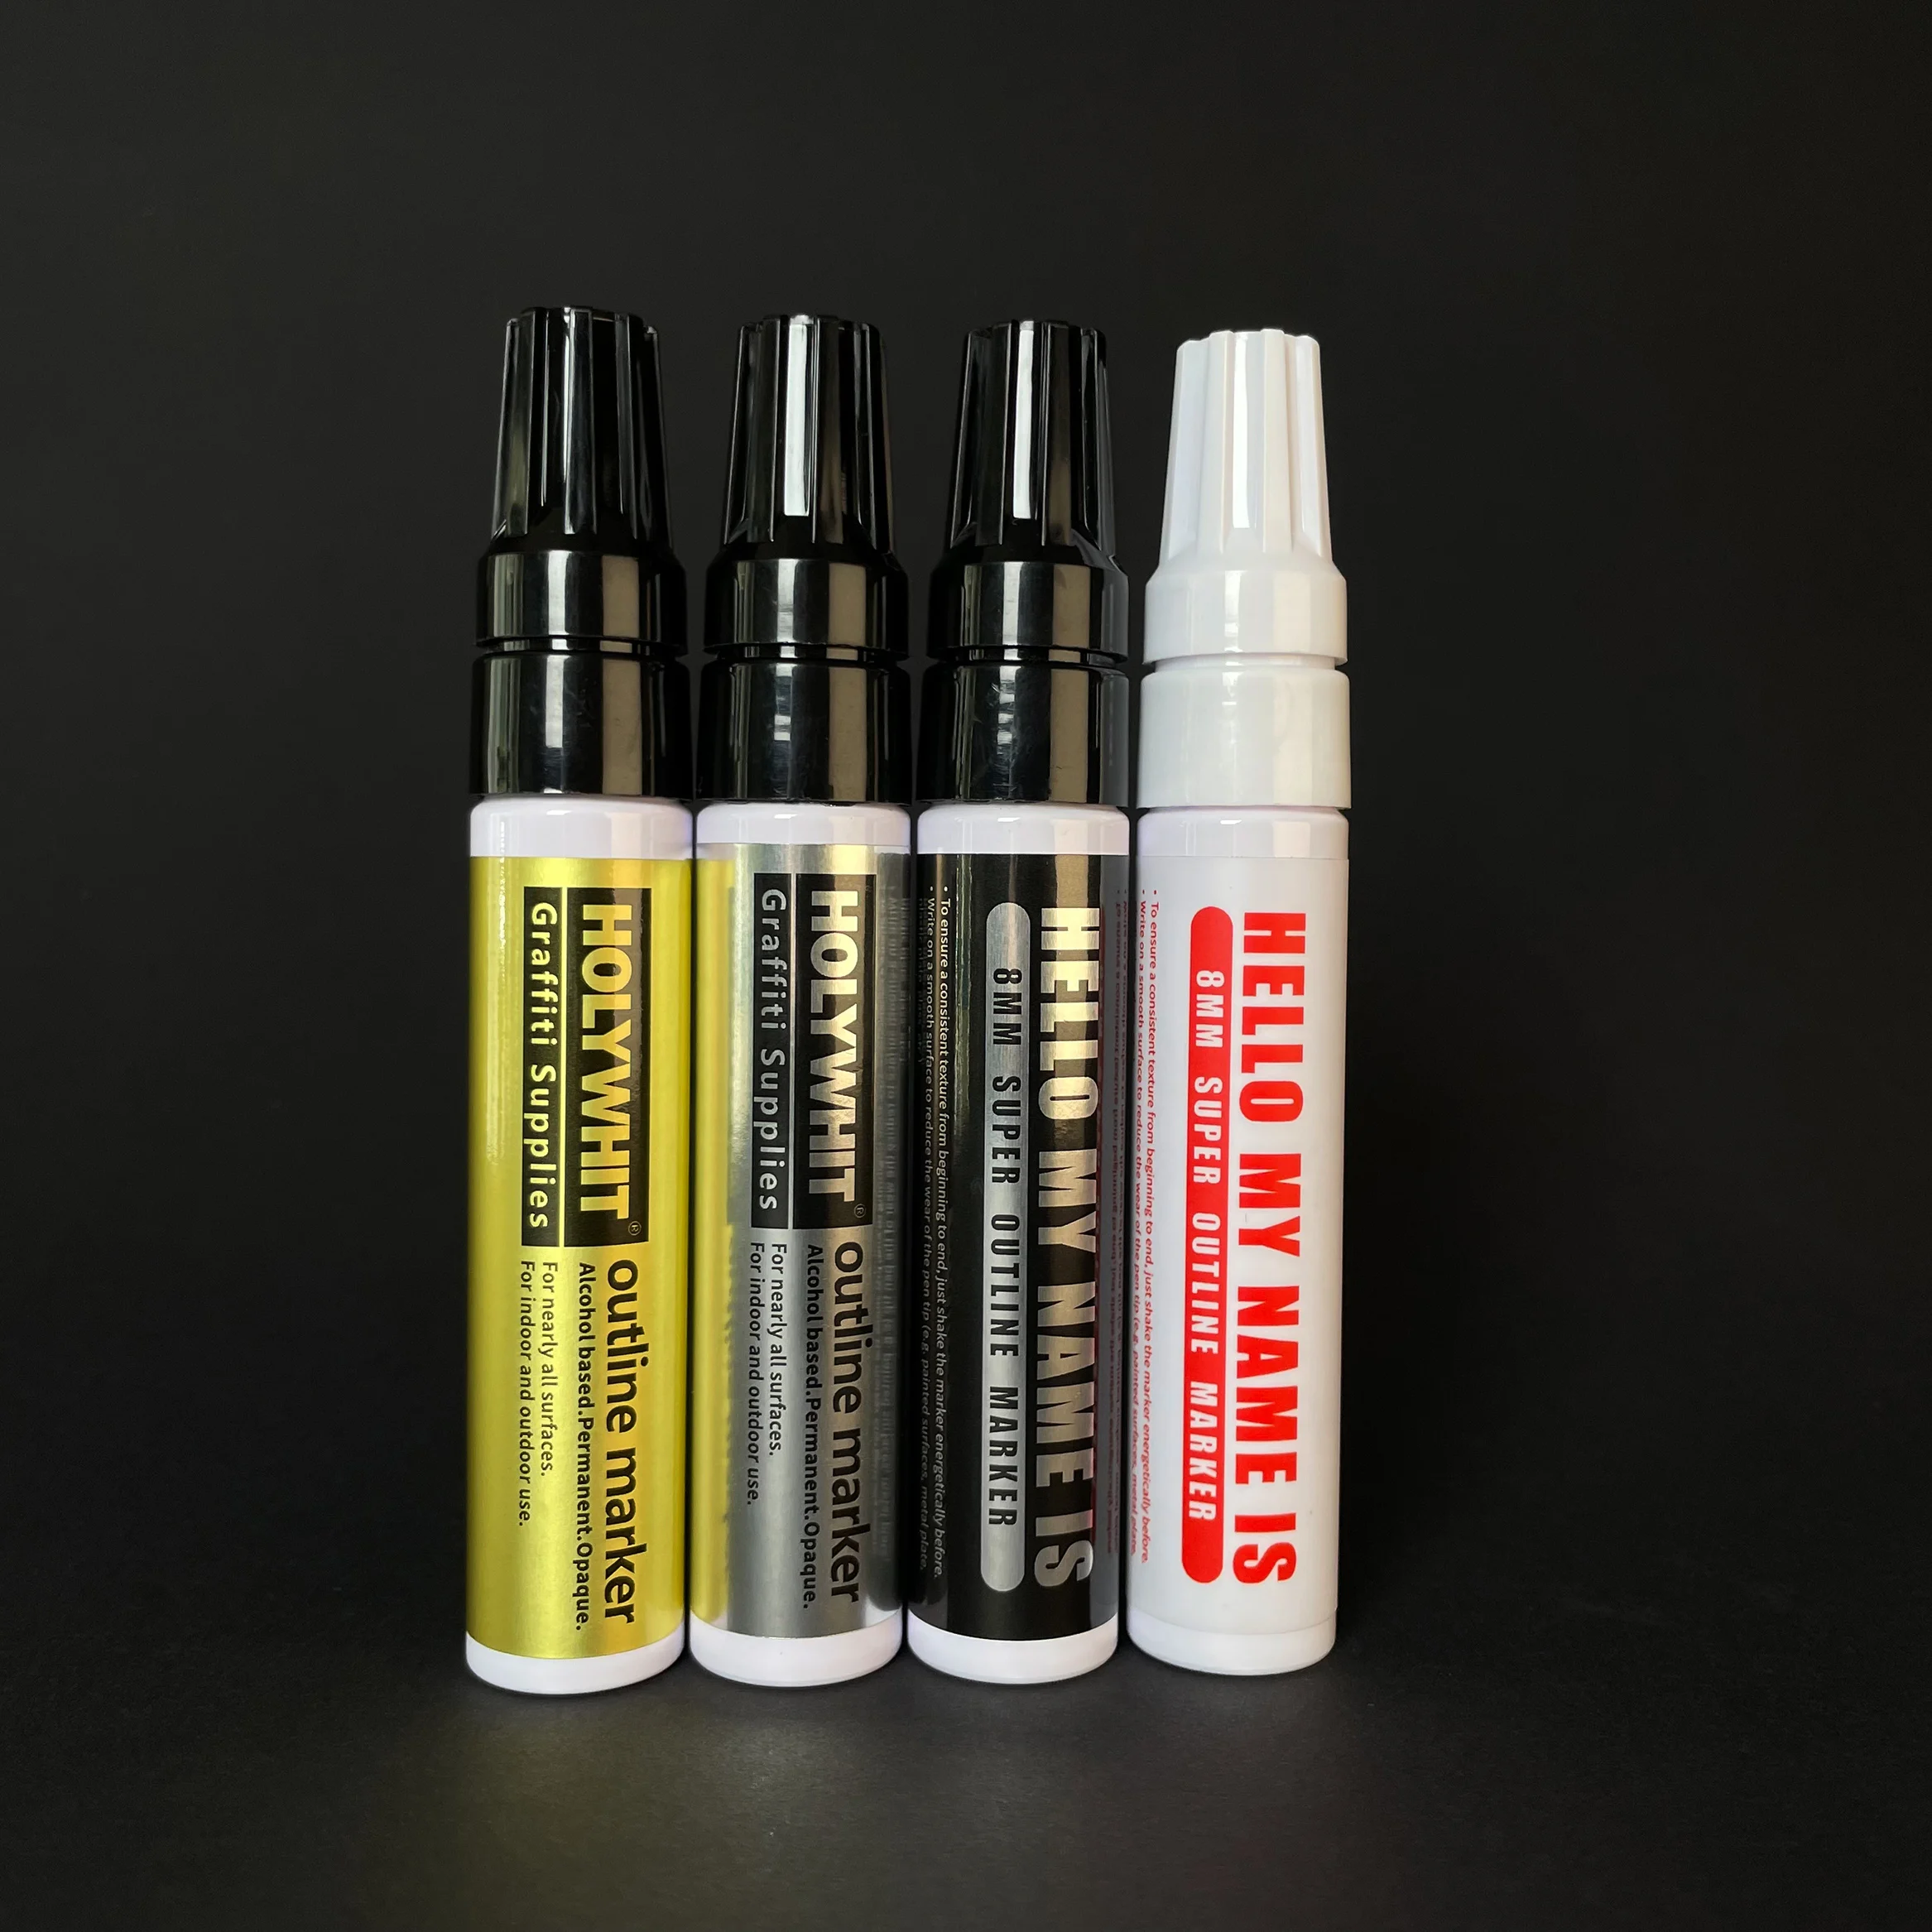 

HOLYWHIT Graffiti Signature Pen/Metal tube paint pen/Oil-based waterproof 8mm/4mm Marker can be inked